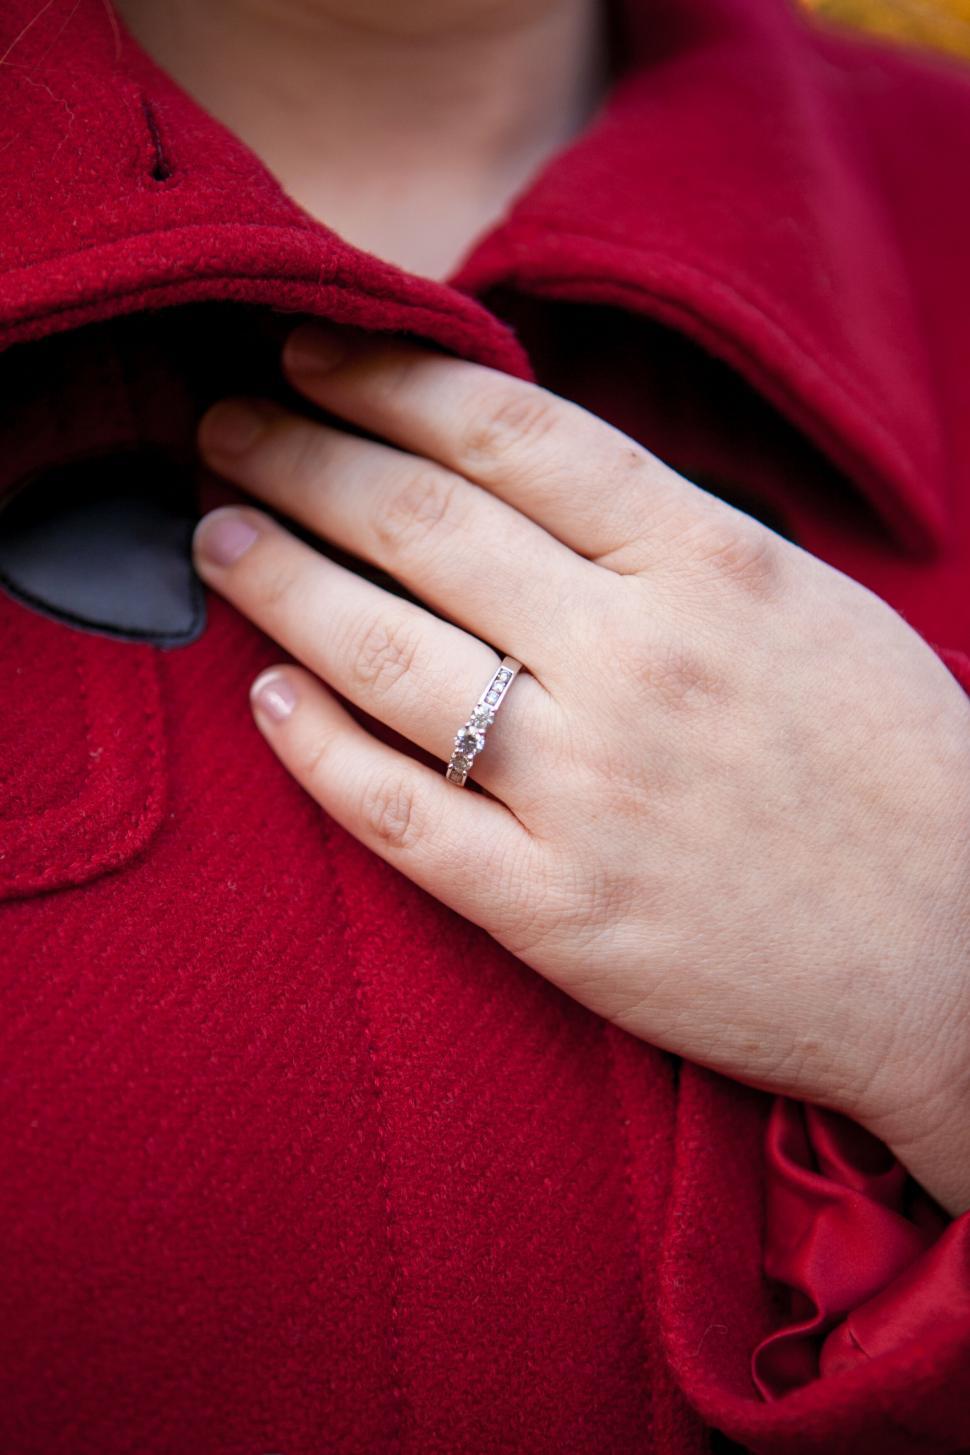 Free Image of Hand with diamond ring on red coat 